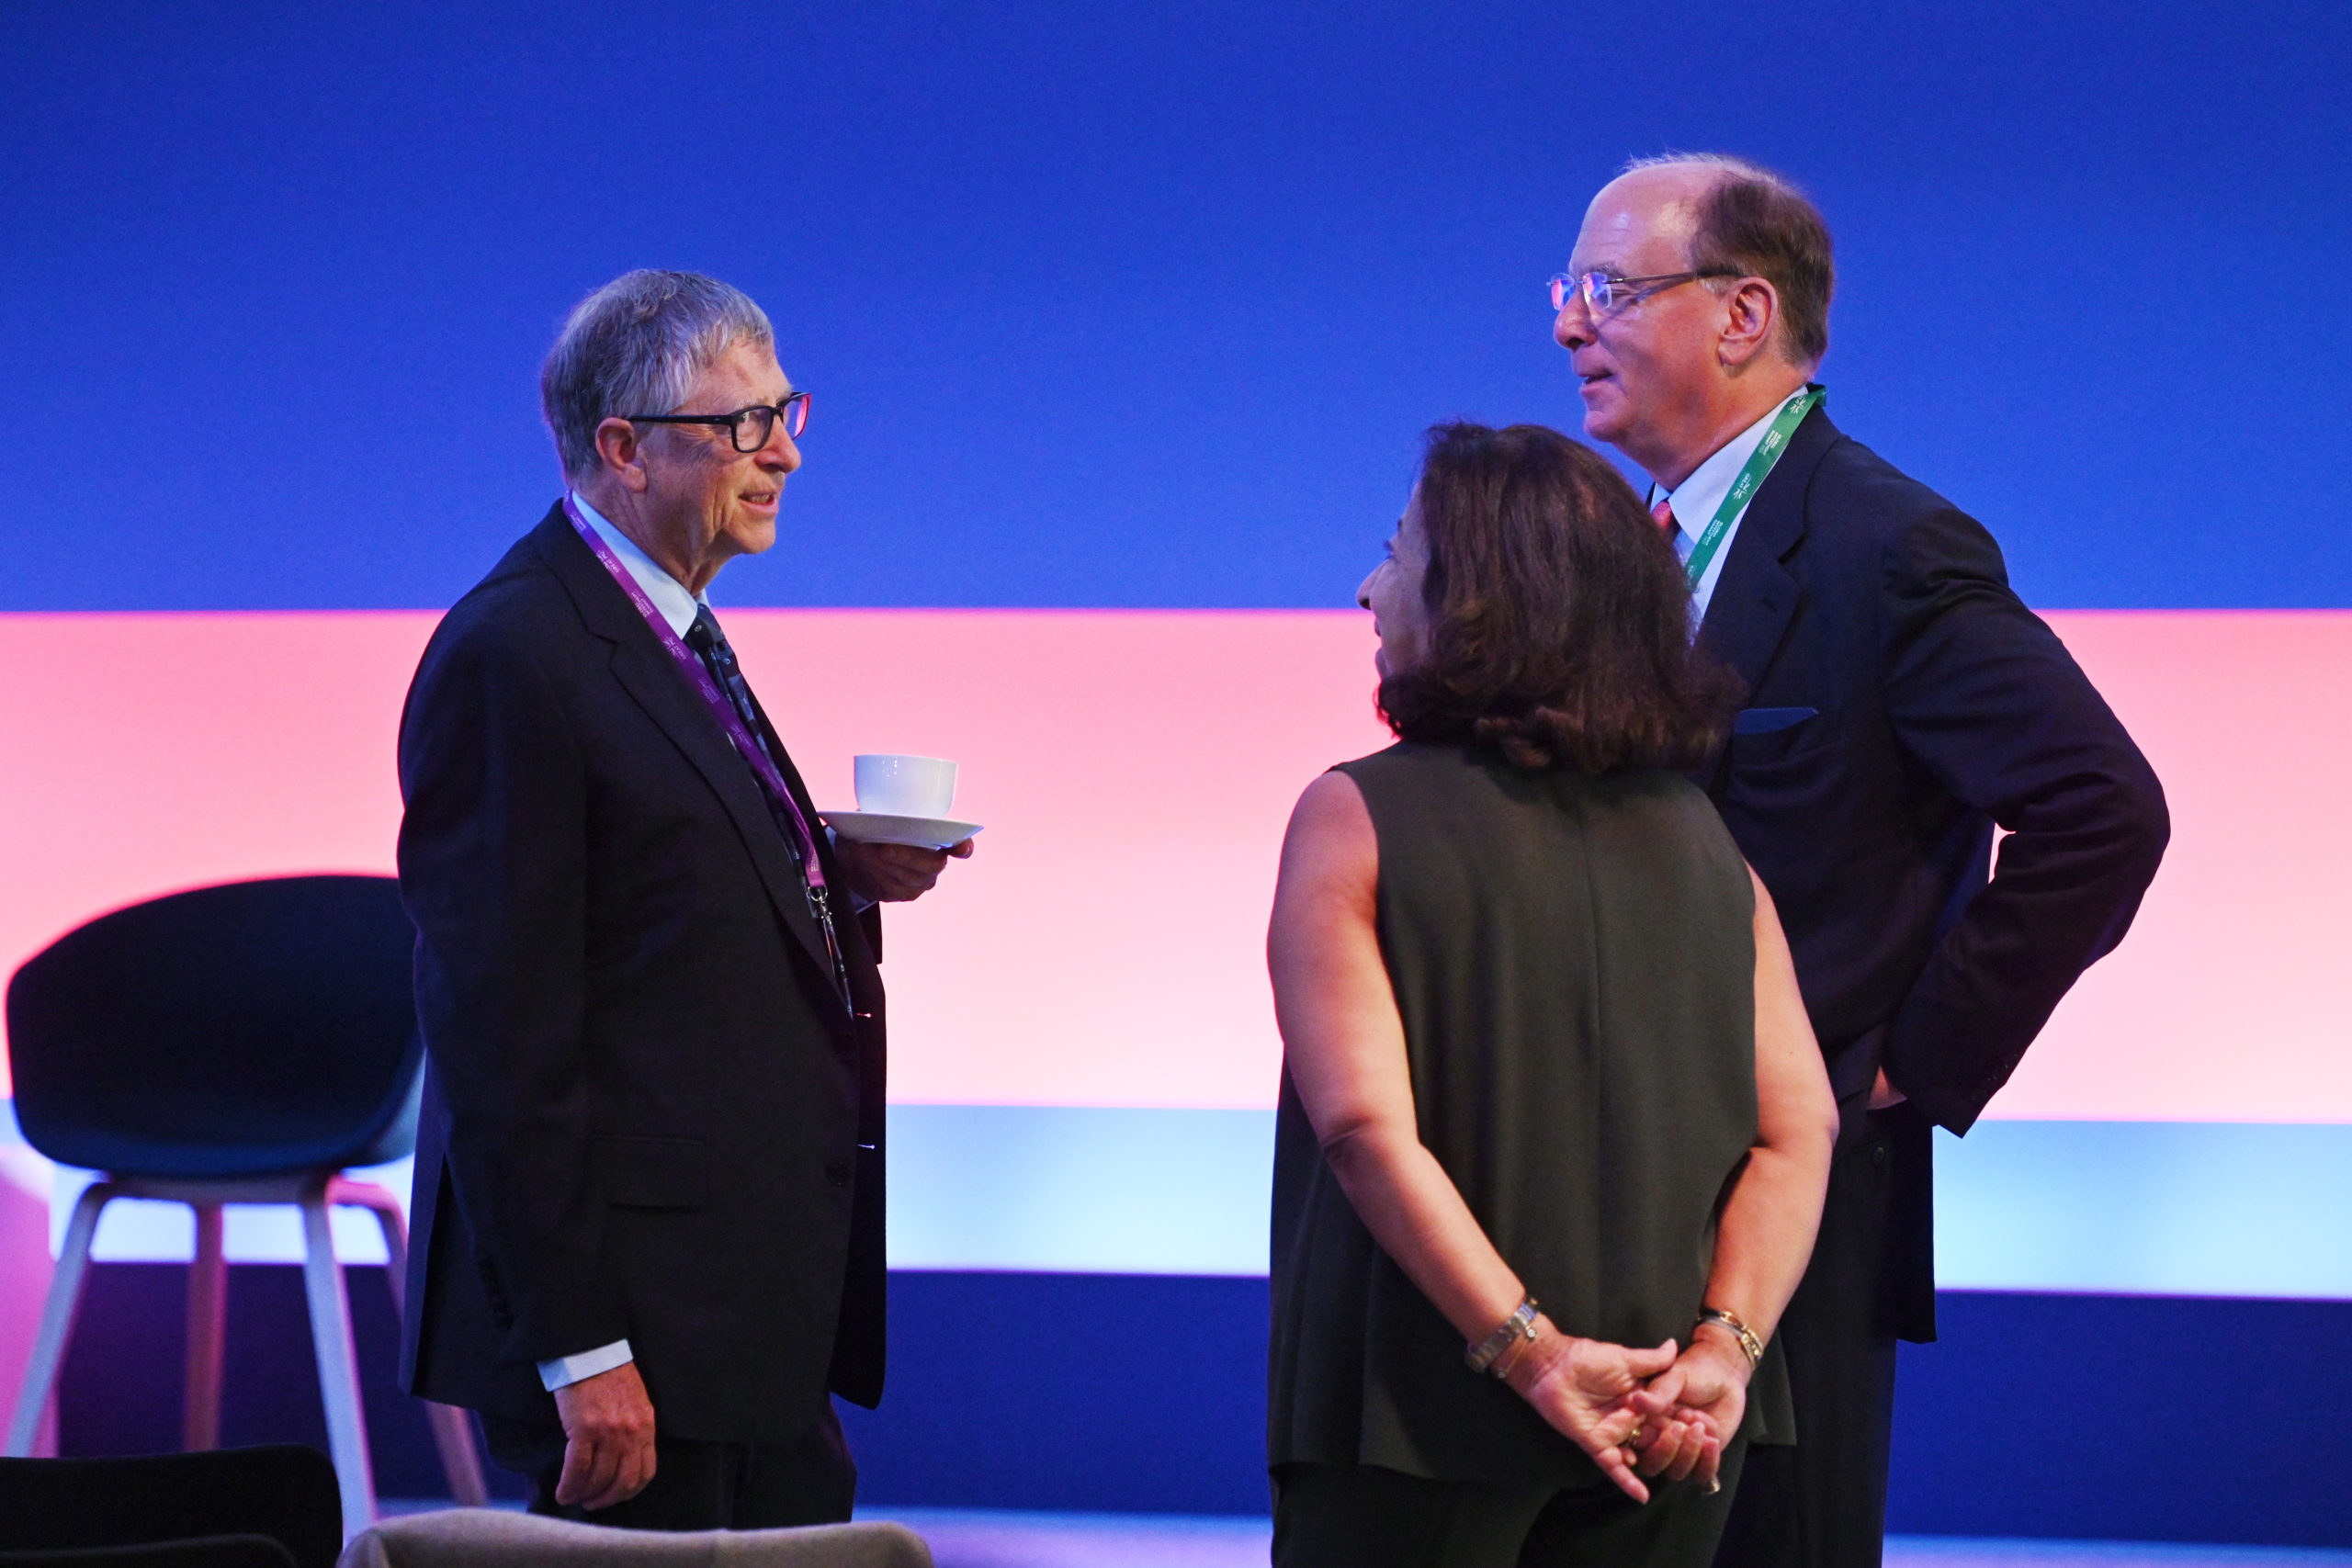 American businessmen Bill Gates speaks with Larry Fink prior to the Global Investment Summit at the Science Museum on Oct. 19 in London, England. (Leon Neal/WPA Pool /Getty Images)